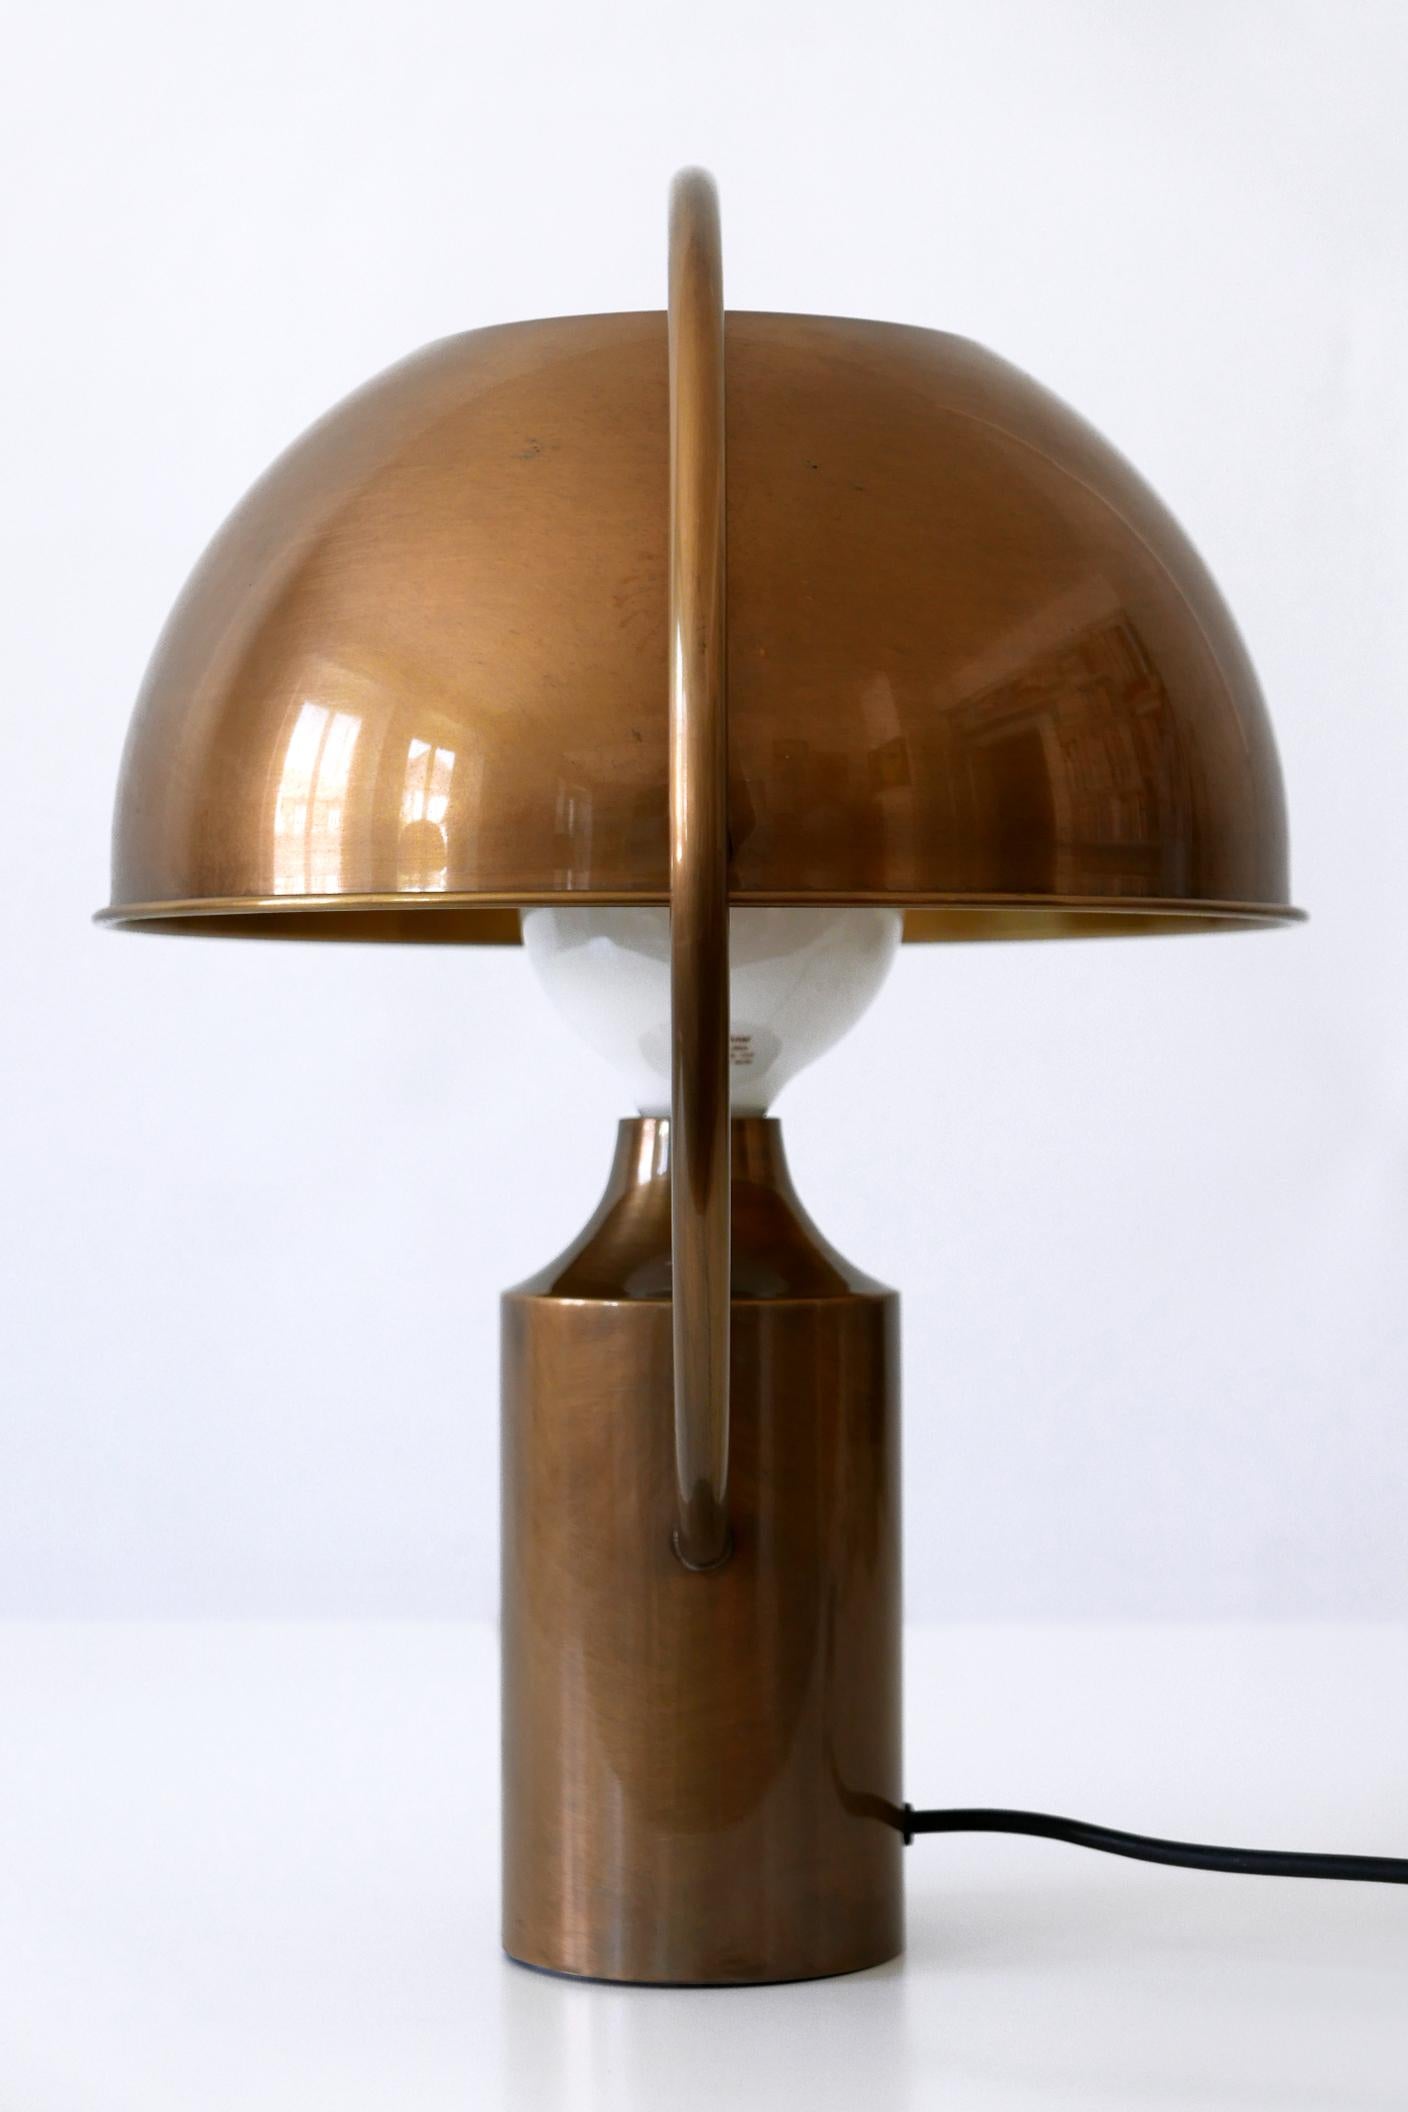 Extremely Rare Mid-Century Modern Table Lamp by Florian Schulz Germany 1970s For Sale 5